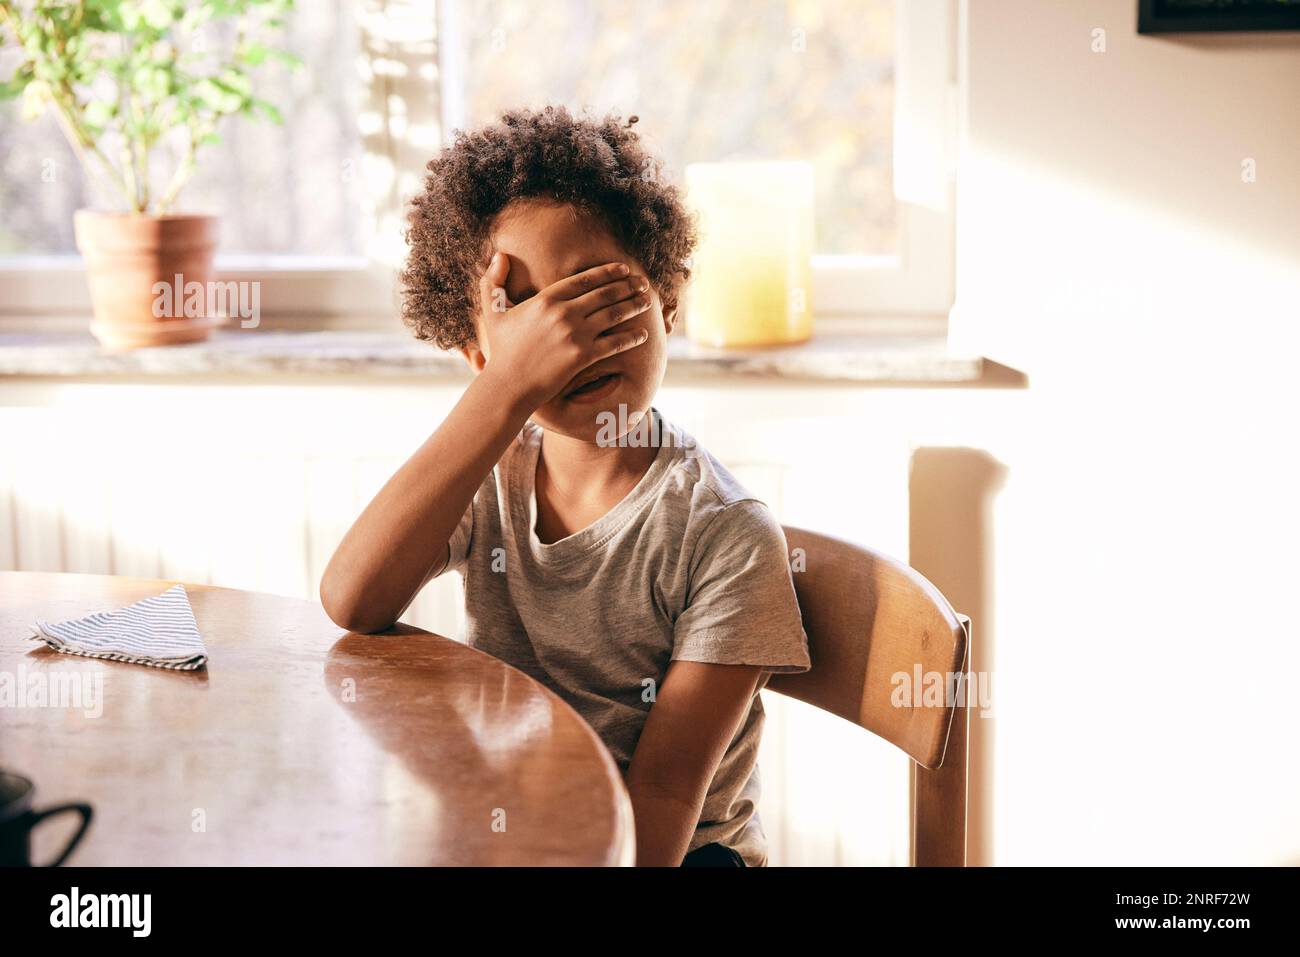 Multiracial boy covering eyes with hands while sitting on chair at home Stock Photo